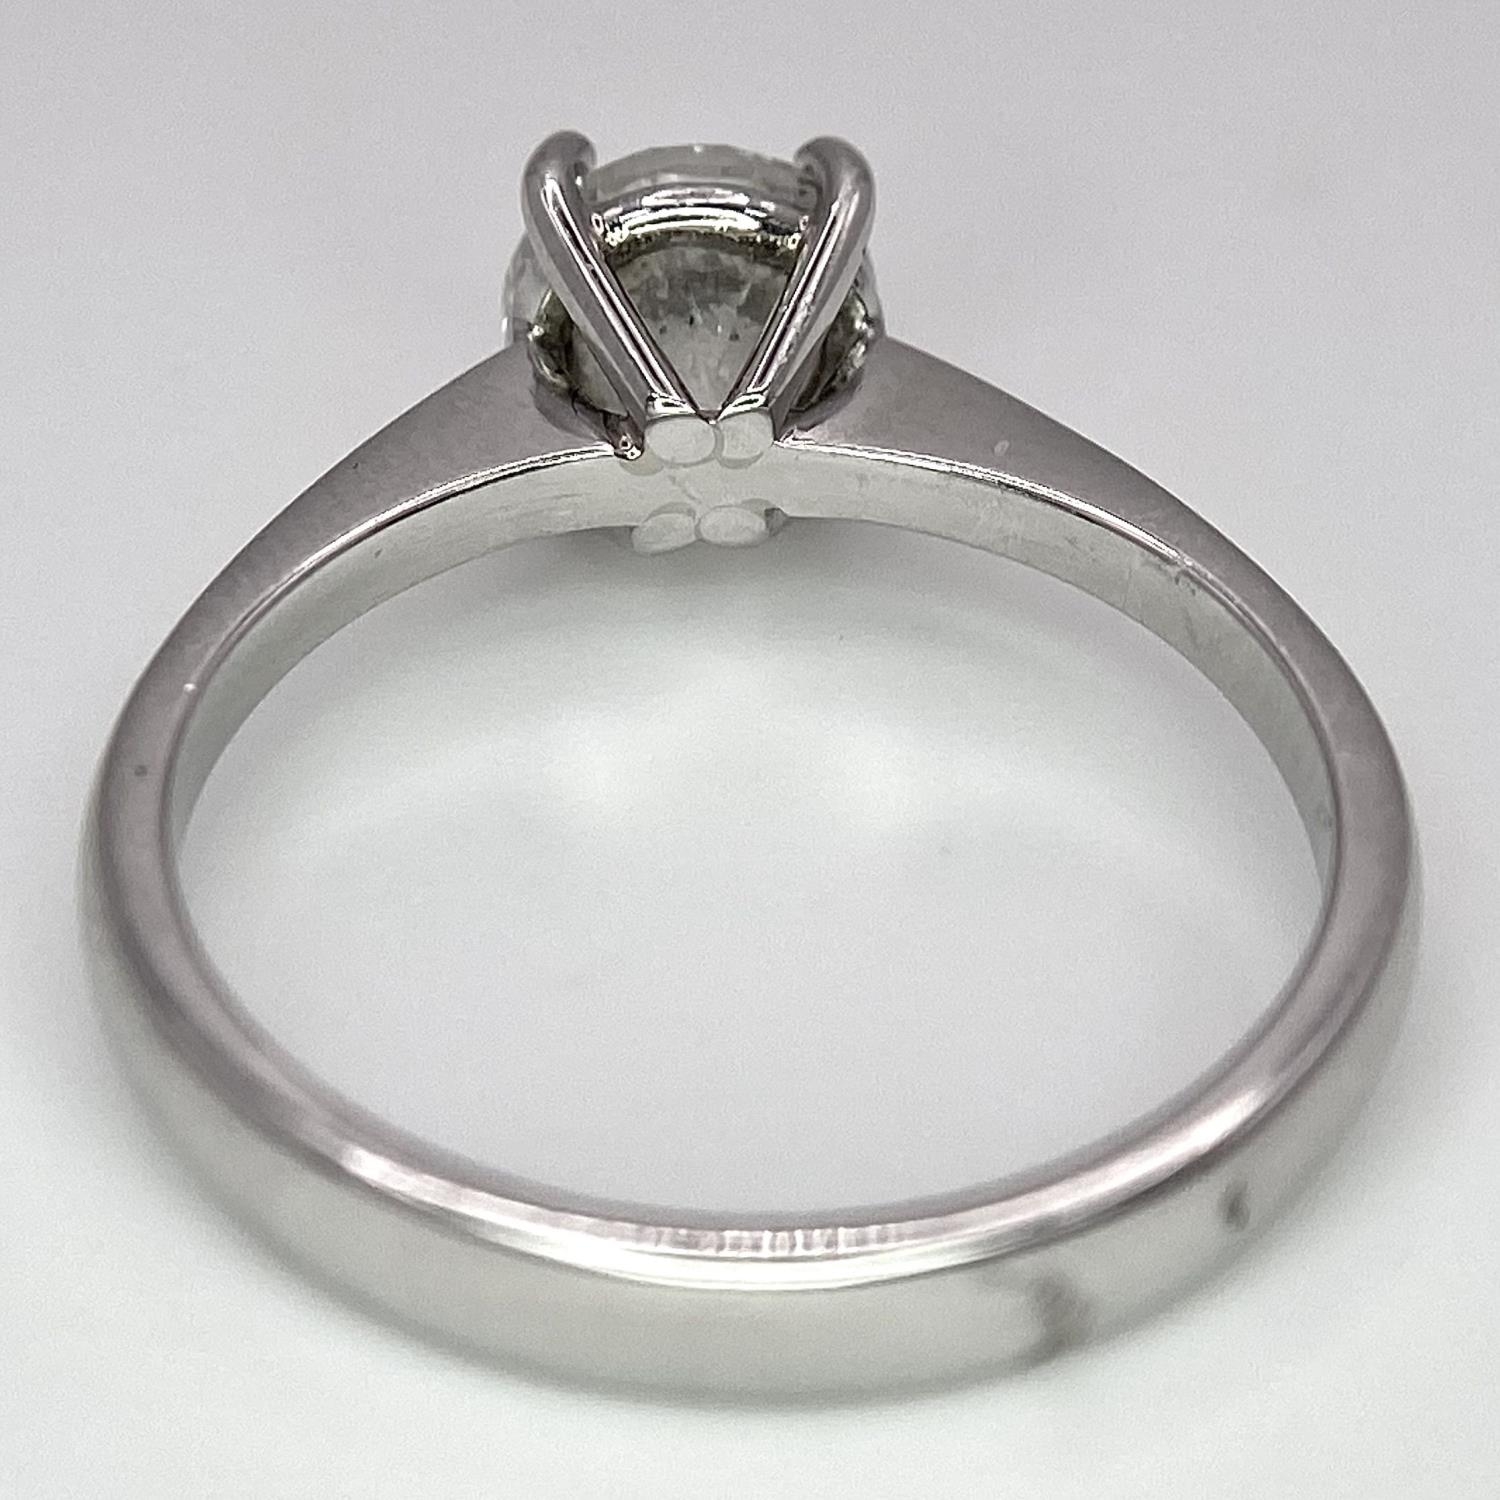 A Platinum Diamond Solitaire Ring. Size L. 4.1g total weight. - Image 5 of 6